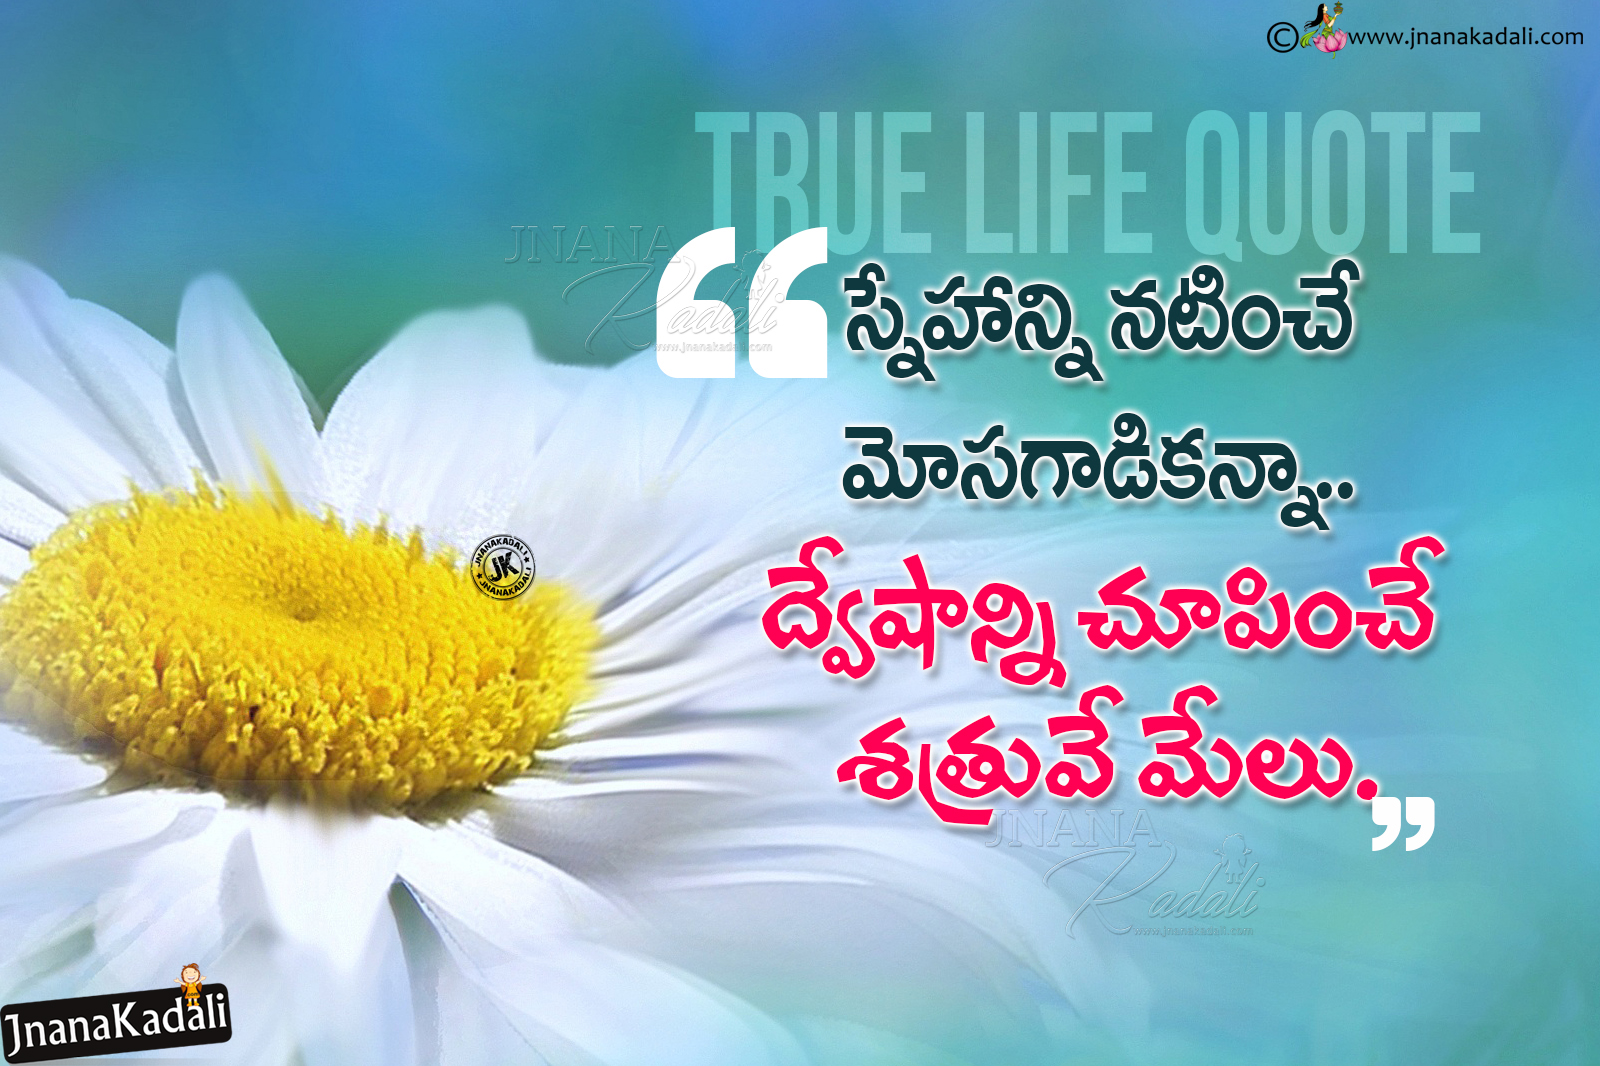 Realistic friendship value quotes messages in telugu-True life ...